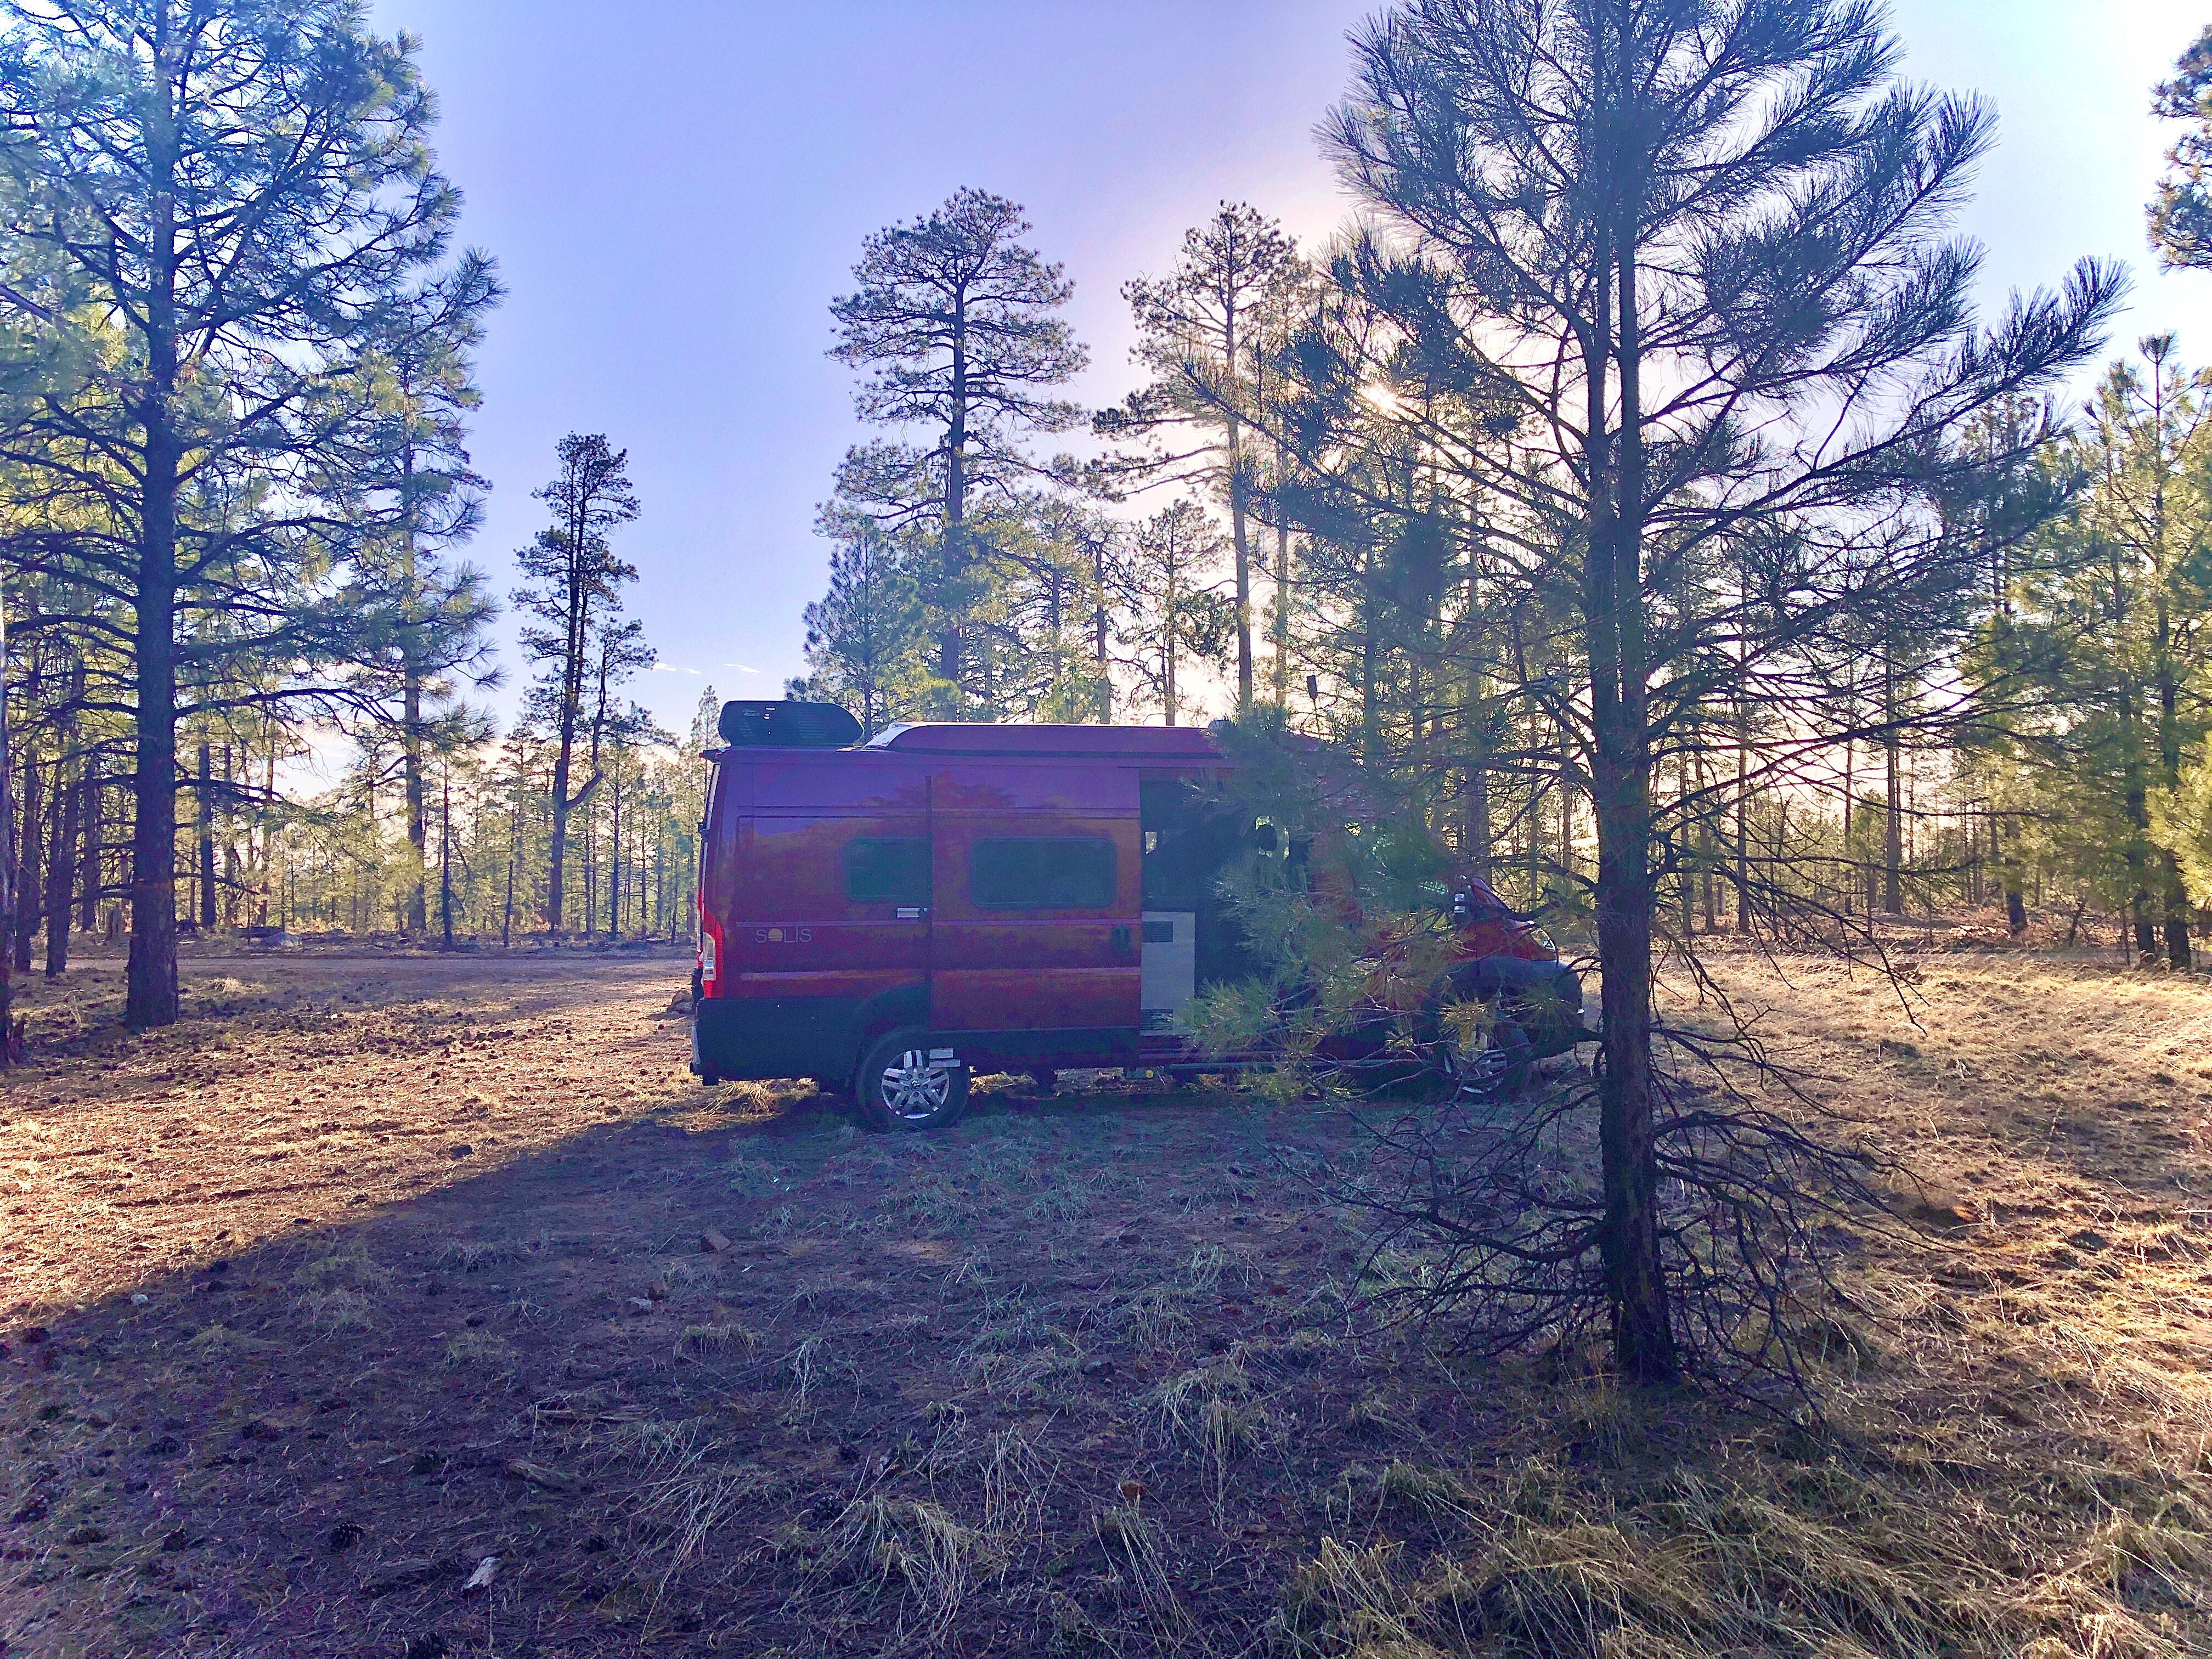 Camper submitted image from FR 170 mile marker 1 - 3